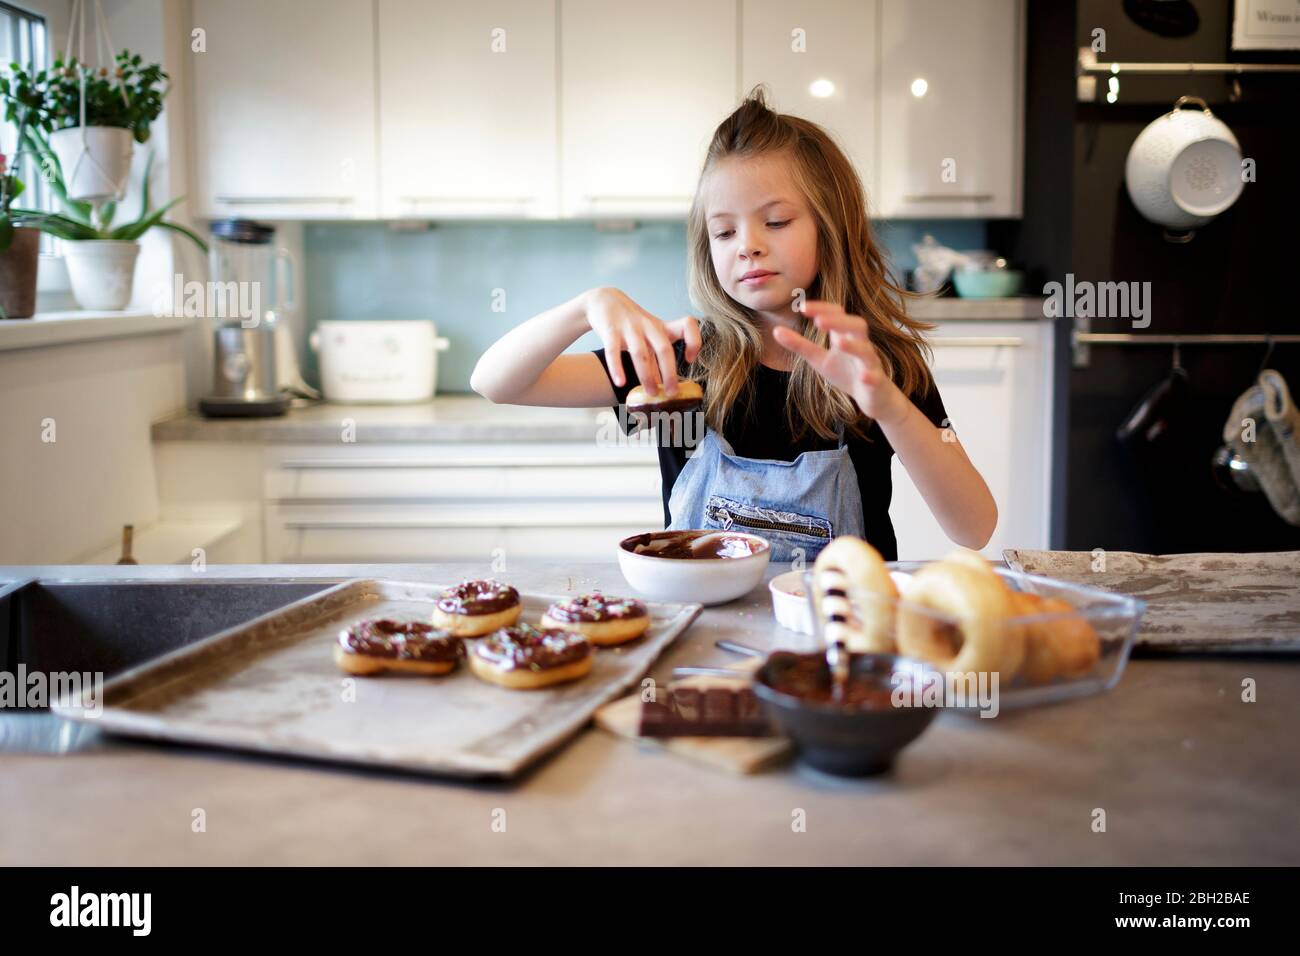 Portrait of smiling girl dipping home-baked doughnut into chocolate icing Stock Photo